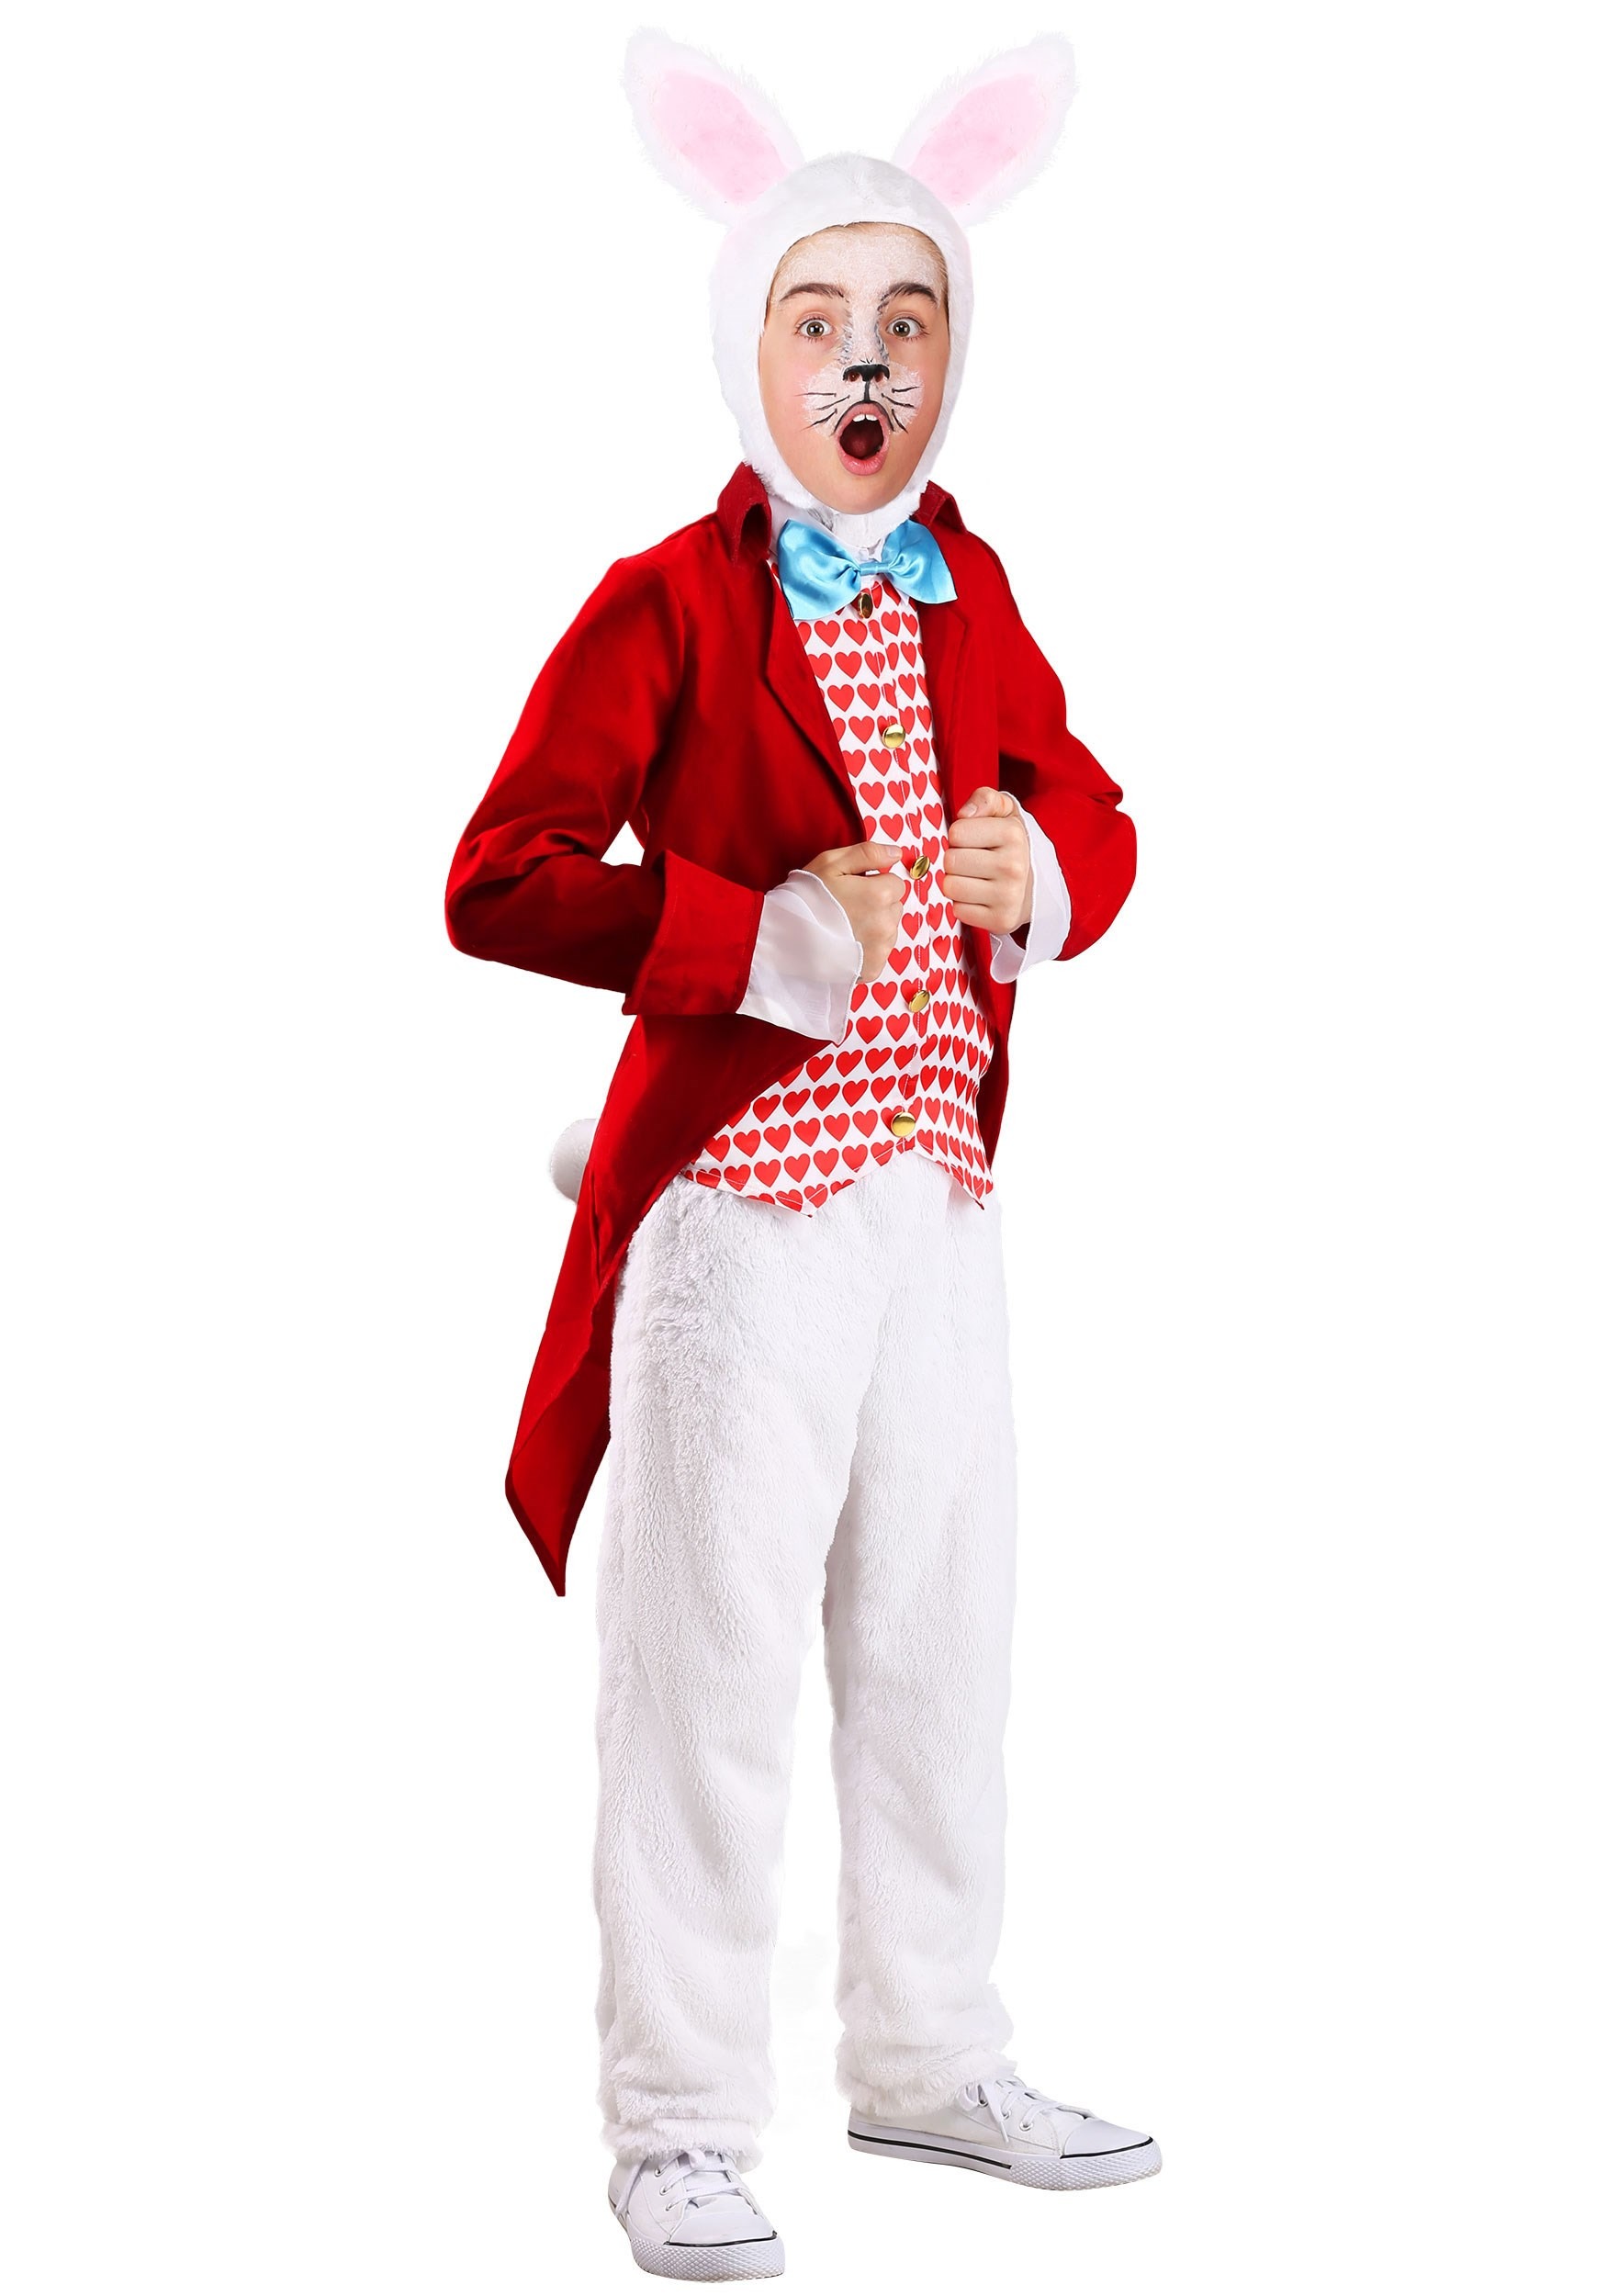 Photos - Fancy Dress FUN Costumes Fancy White Rabbit Costume for Children Red/Blue/Whit